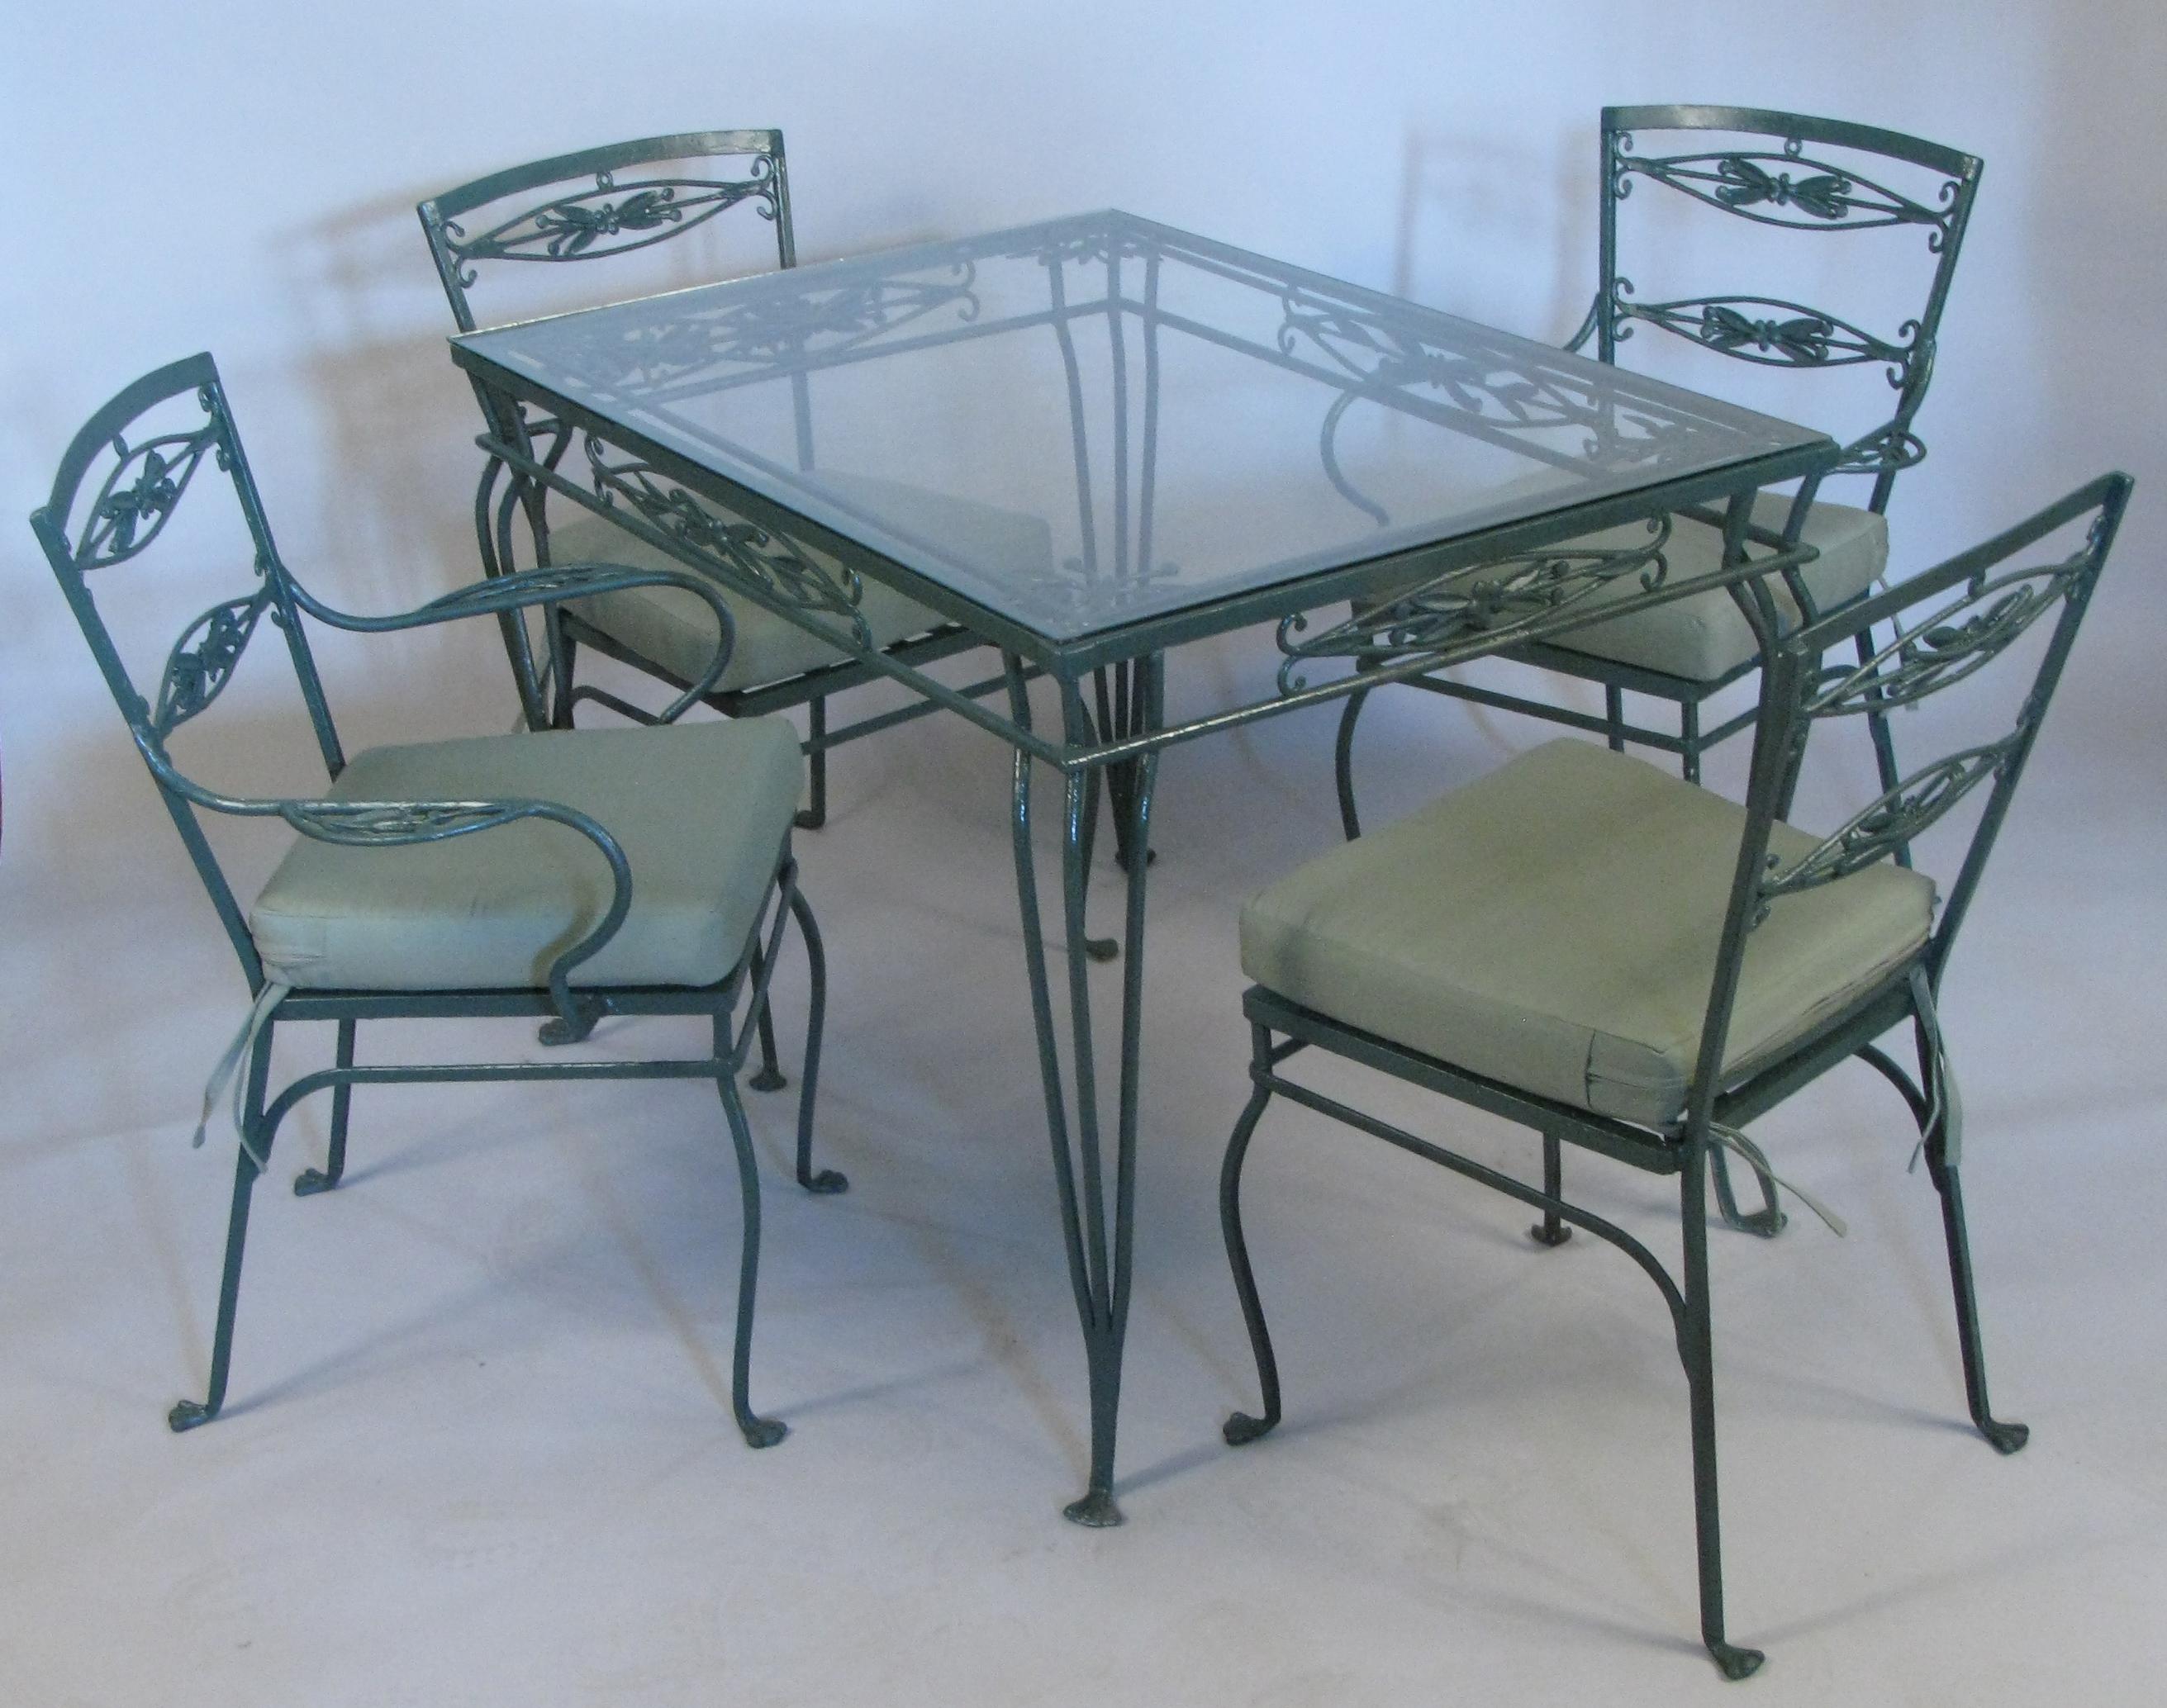 A very charming vintage 1940s dining set with wrought iron frames beautifully detailed with leaves and berries. the set has a pair of armchairs and a pair of armless chairs, as well as the matching glass top dining table. the set has been finished